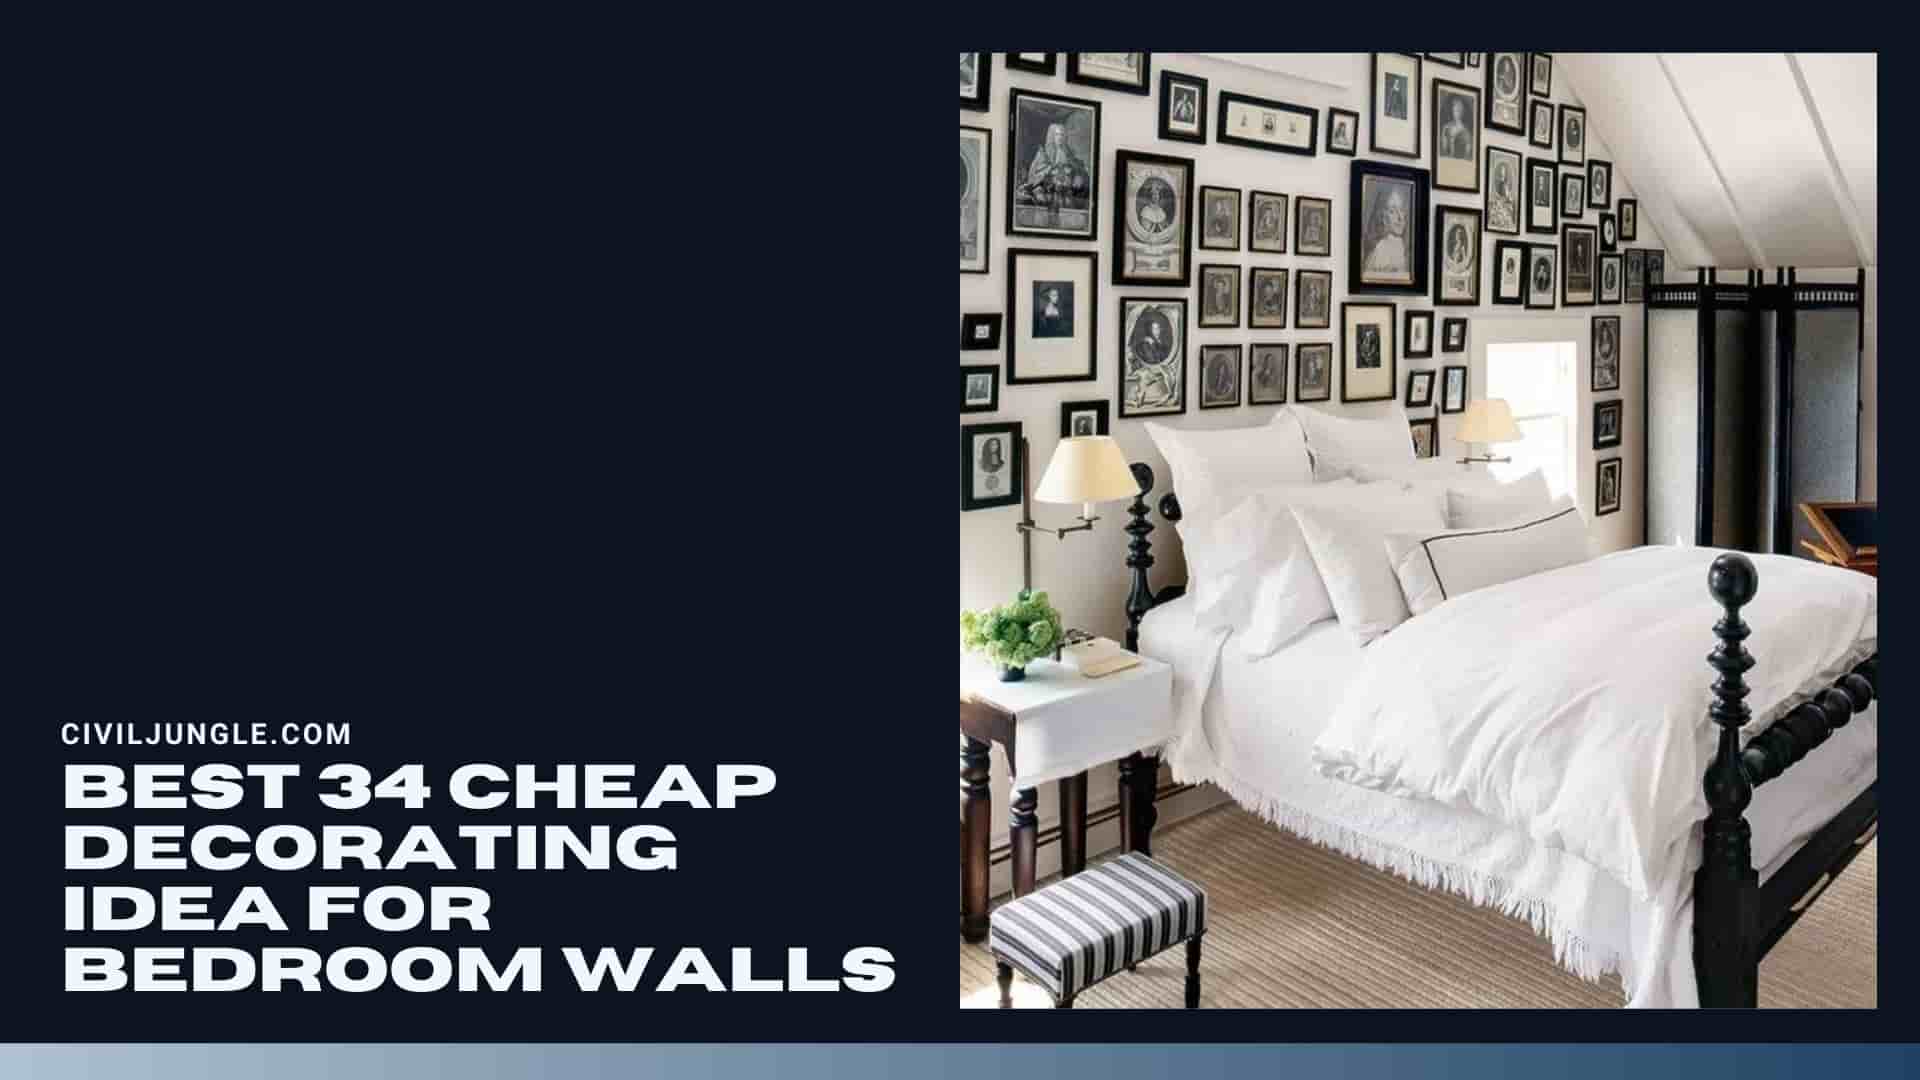 Best 34 Cheap Decorating Idea for Bedroom Walls